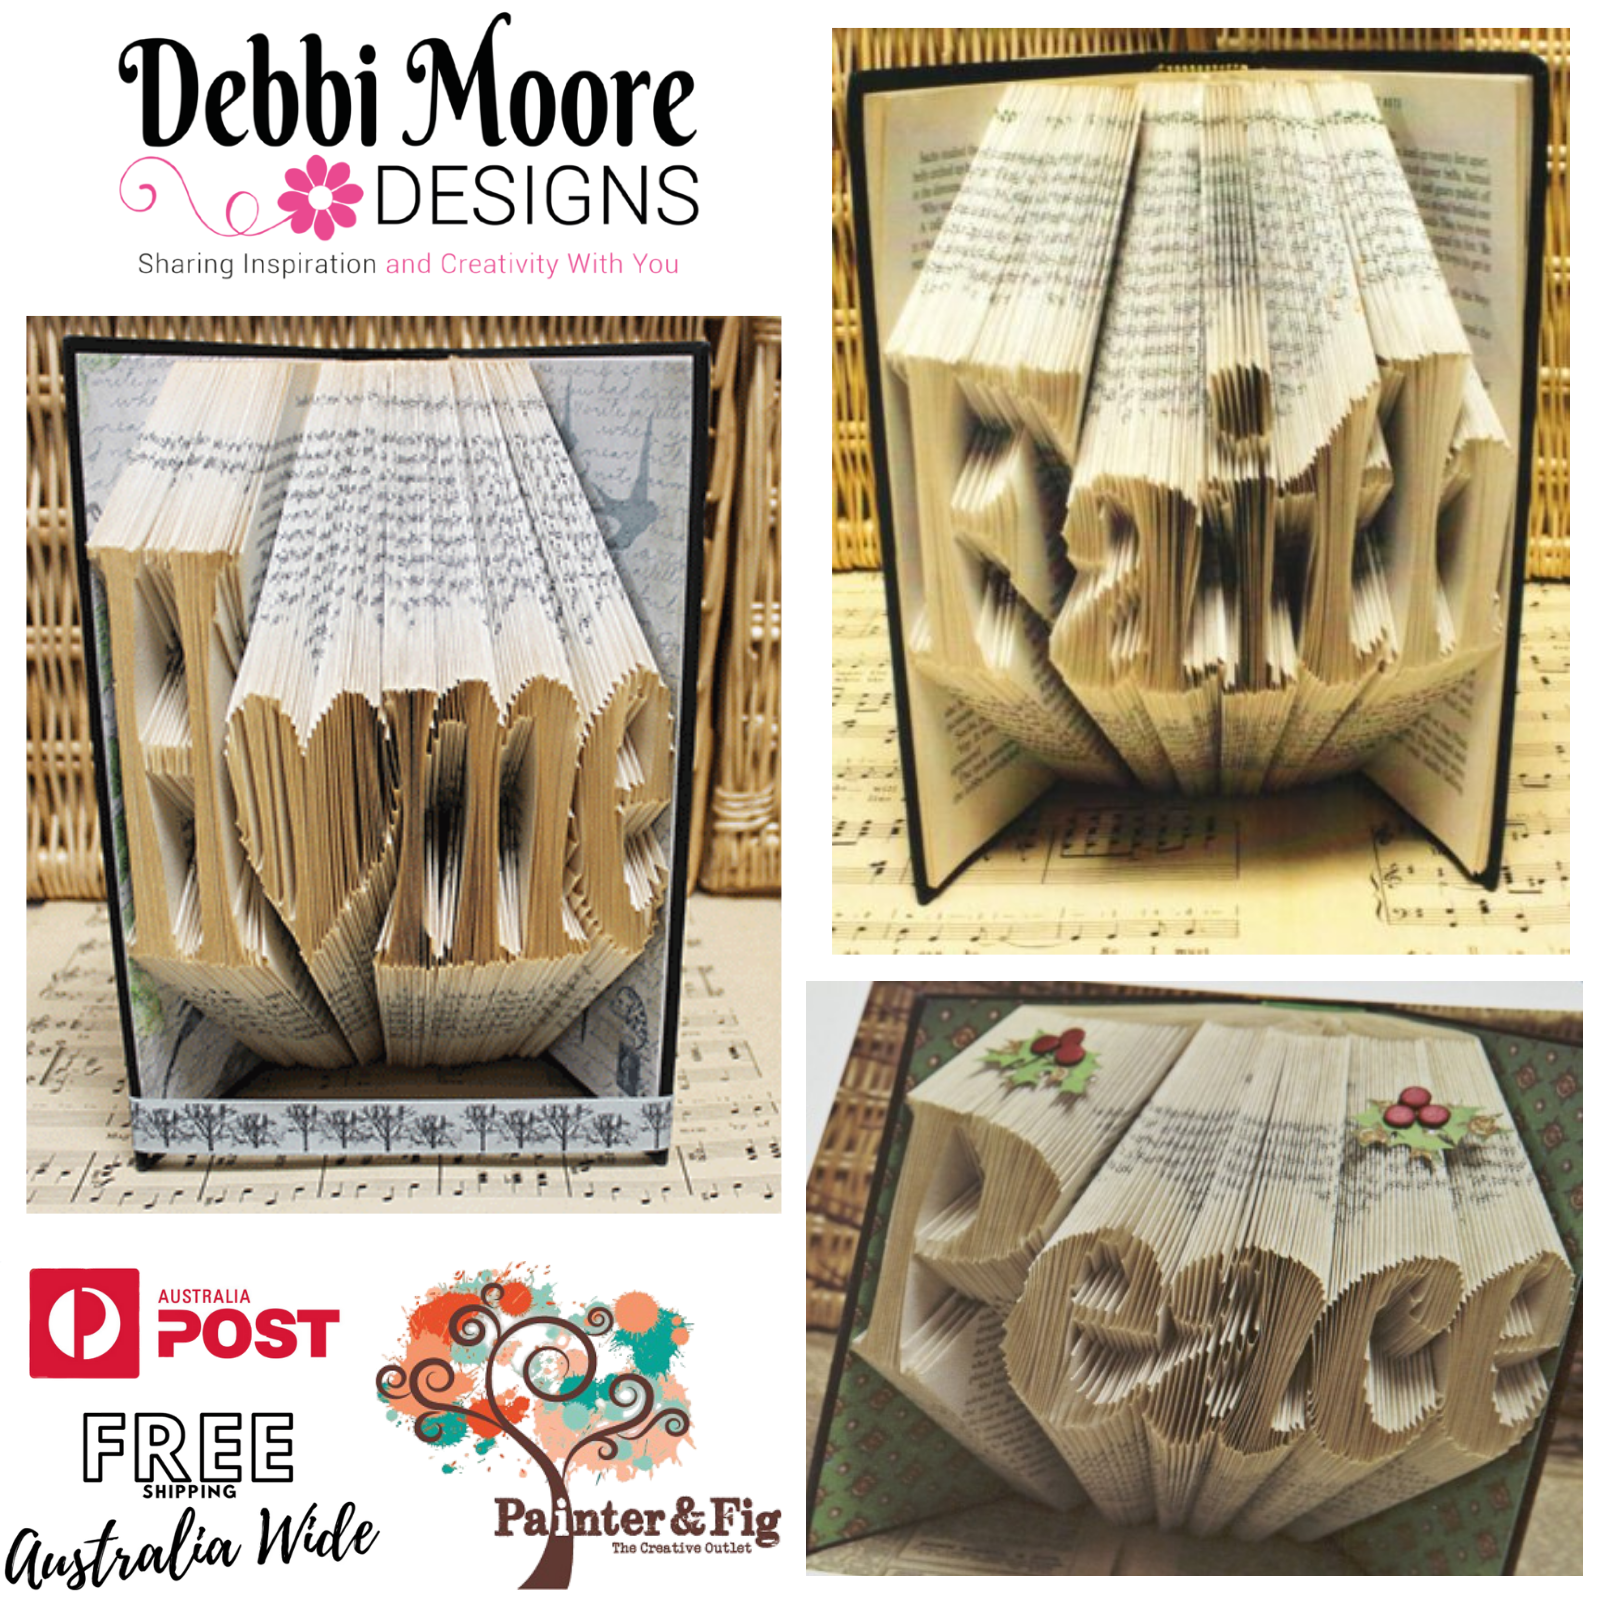 Folding Books - Upcycling Old Books, Easy to Do - Debbi Moore Designs